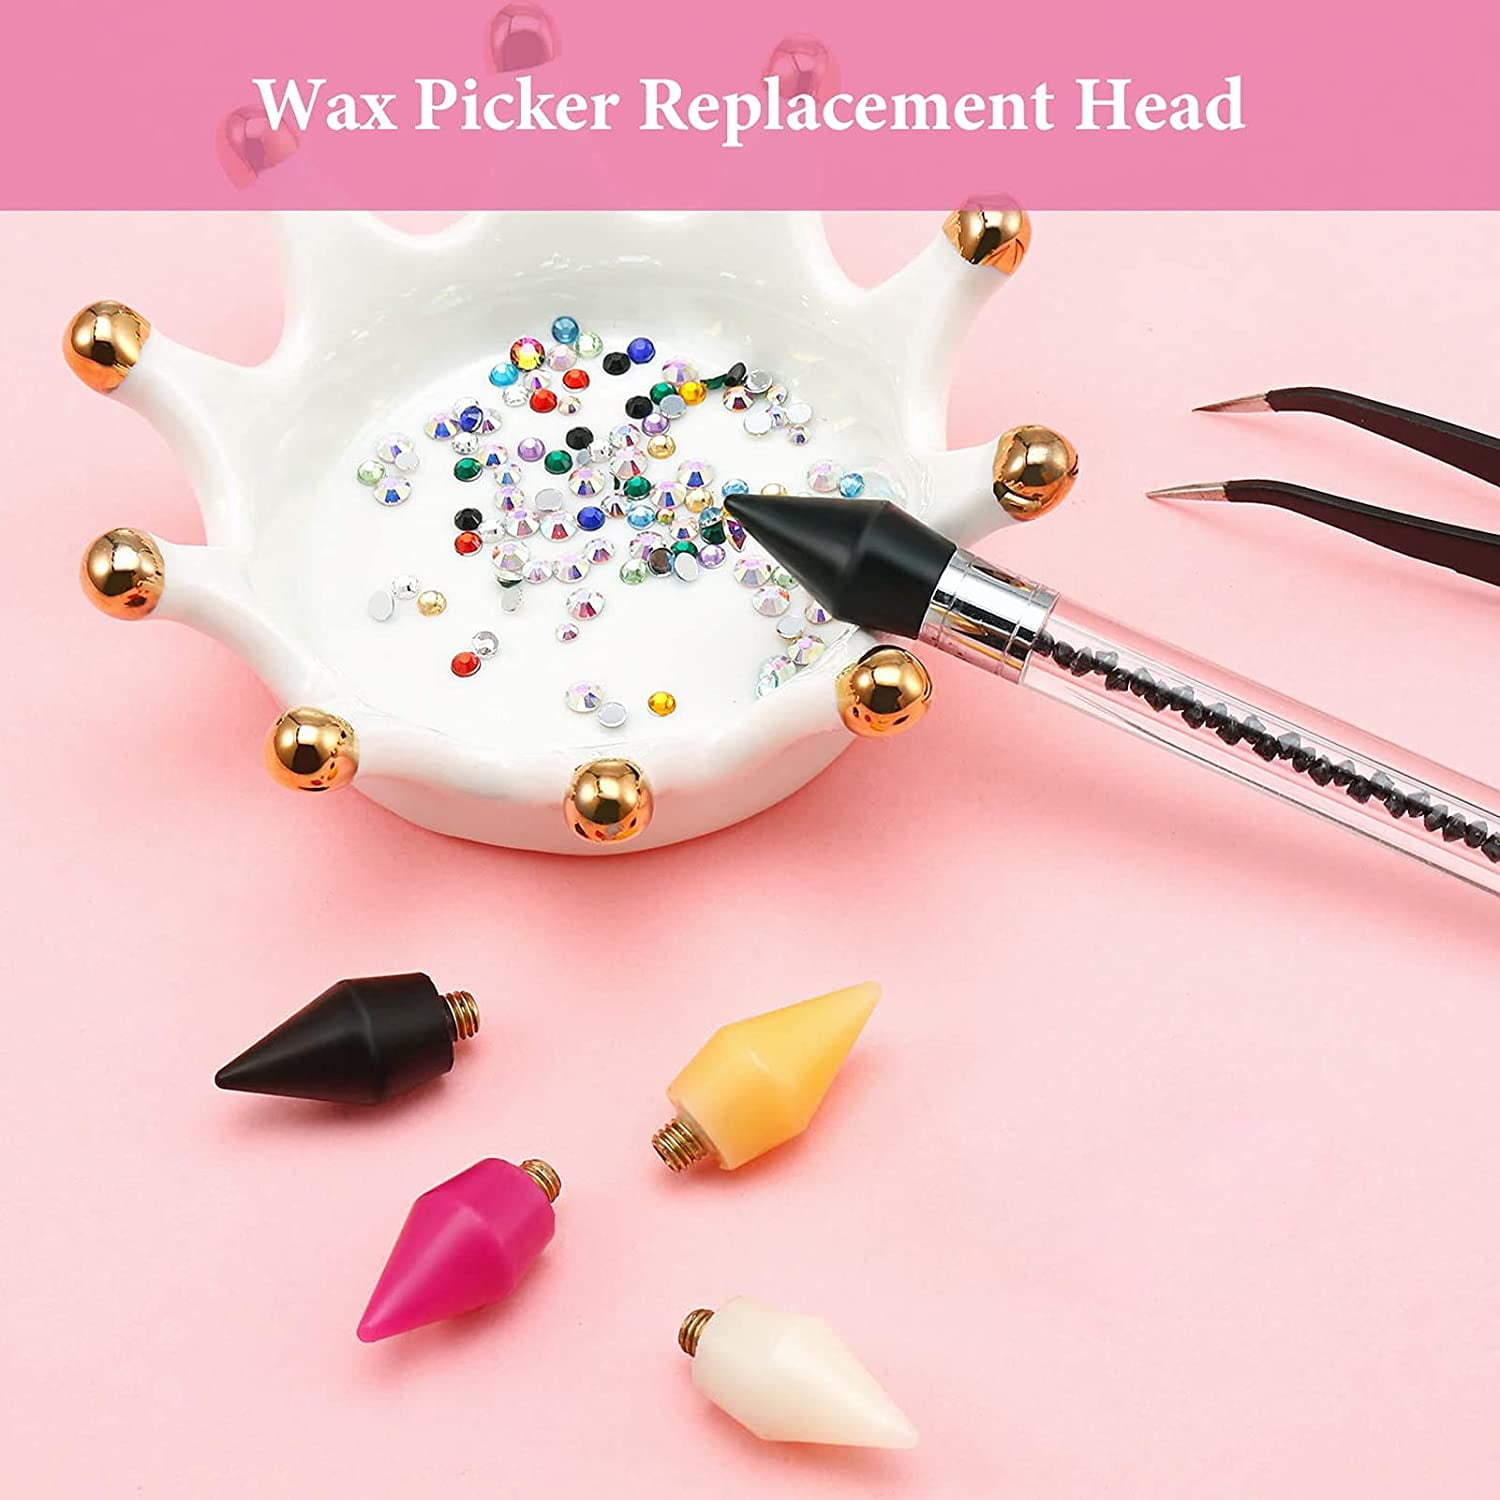 Zoizocp 12 Pieces Wax Replacement Head Tips Nail Rhinestones Picker with Case for Nail Dotting Pen to Pick Up Nail Gem Jewelry, Replacement Wax Head